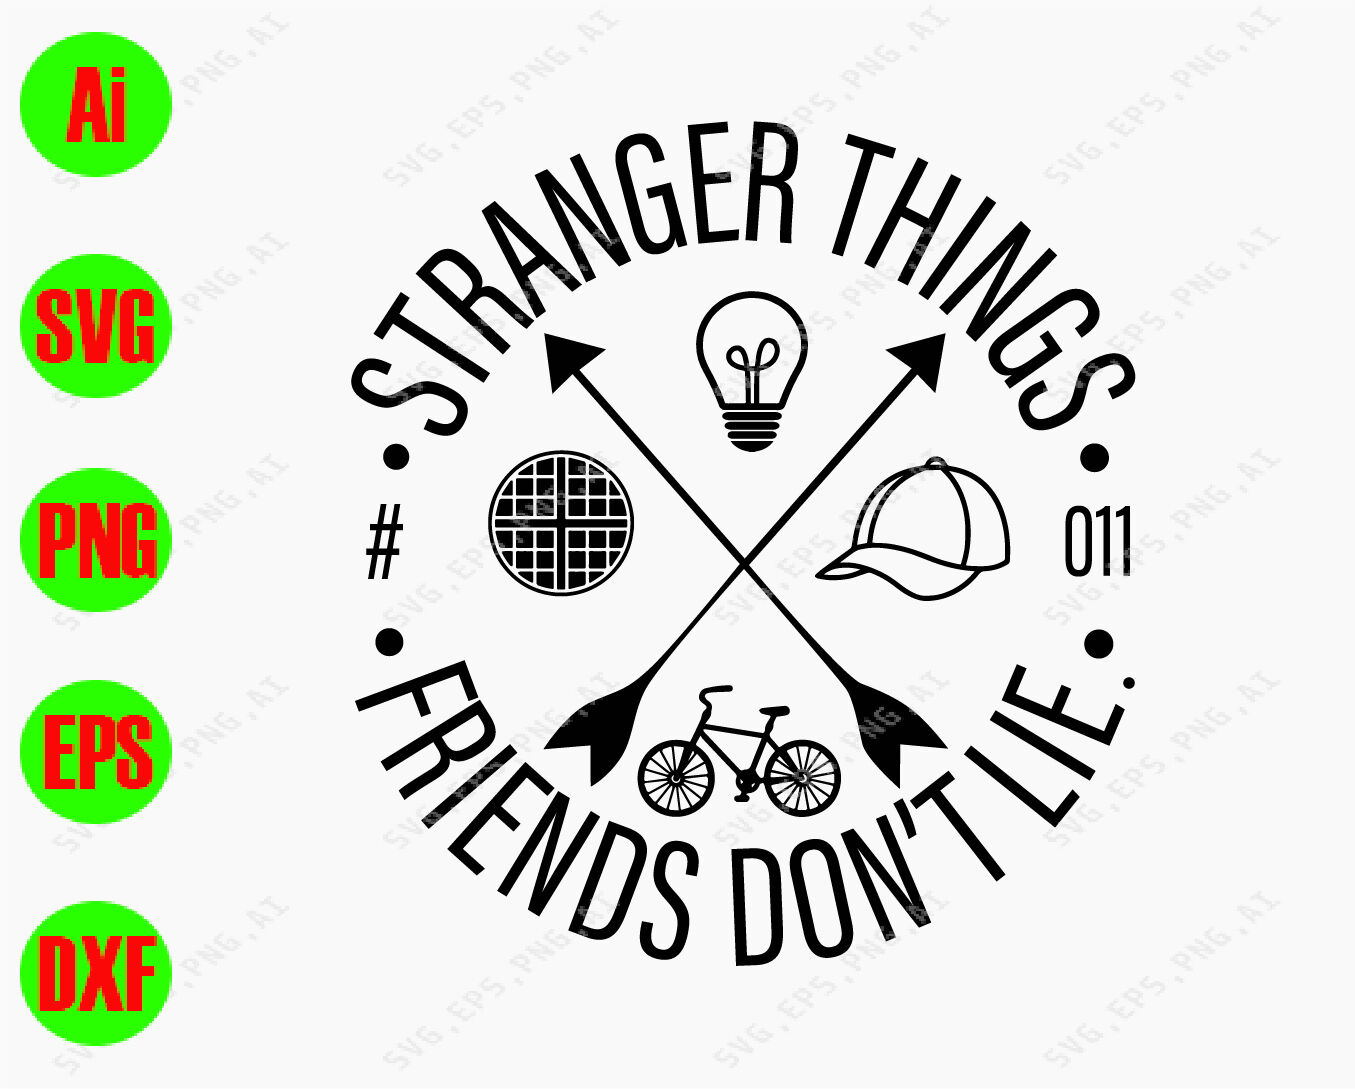 Stranger things friends don't lie svg, dxf,eps,png ...